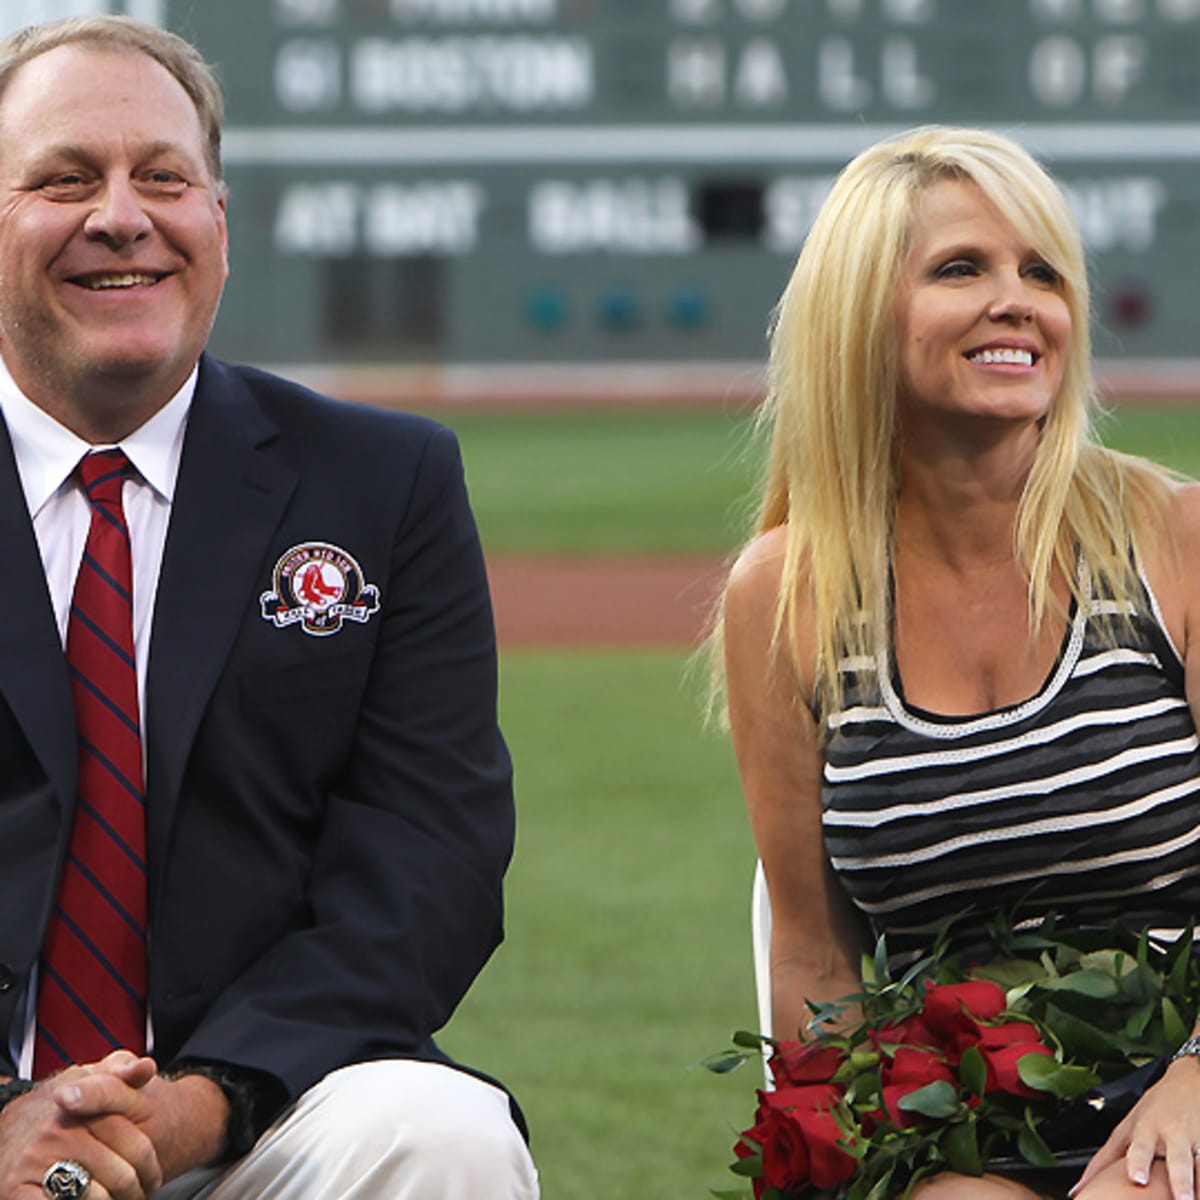 Yankees employee fired for vulgar tweets about Curt Schilling's daughter